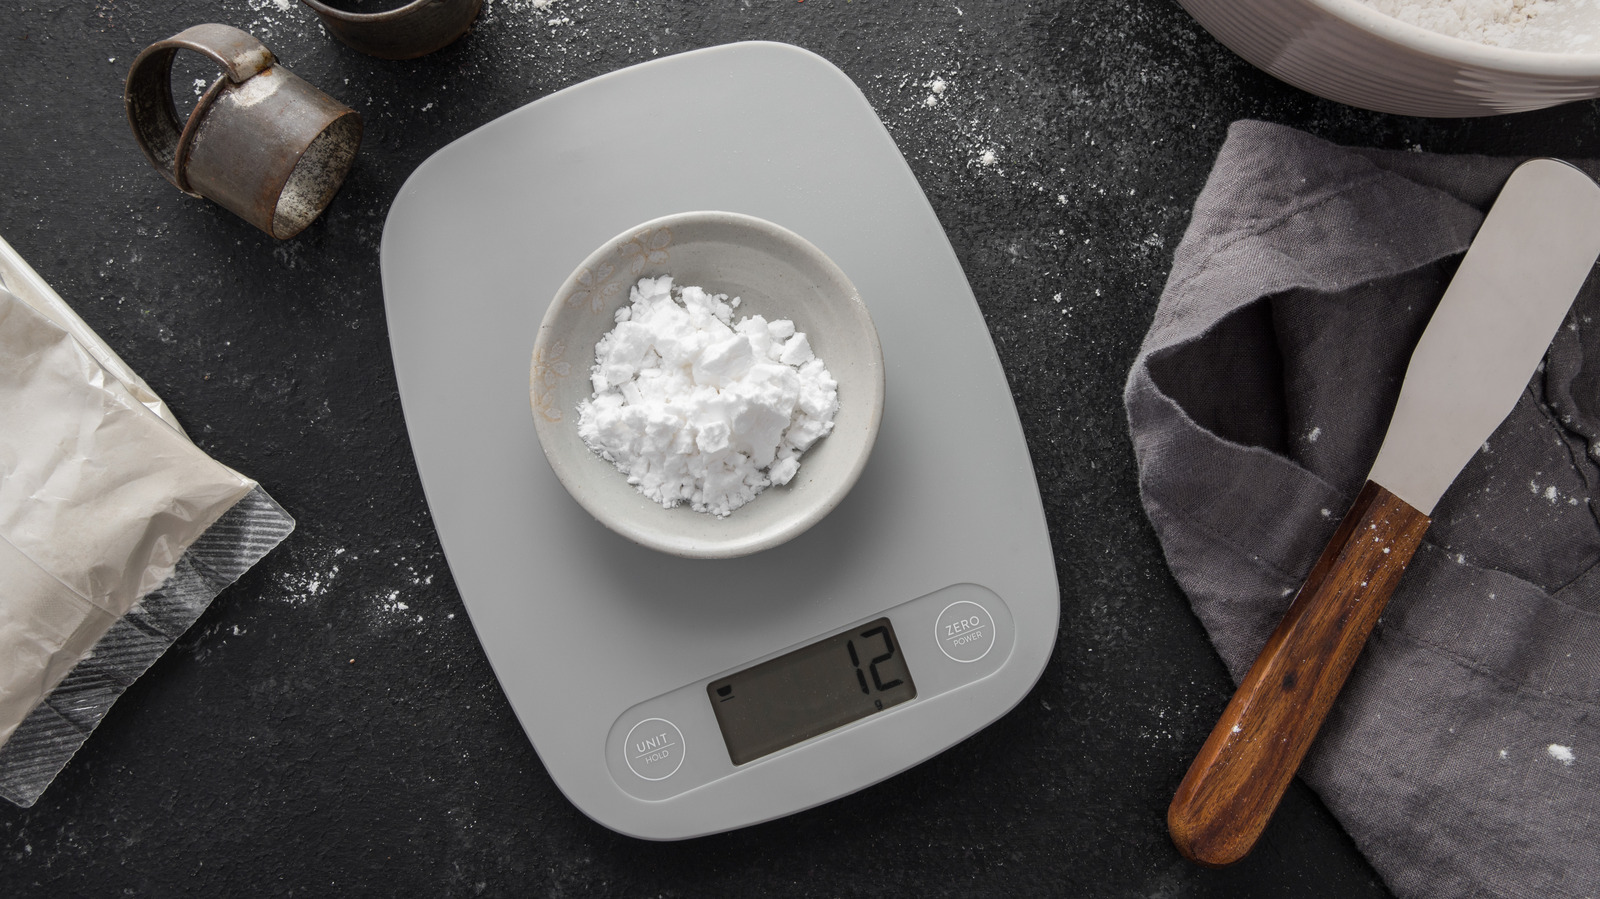 Ozeri Pronto Digital Multifunction Kitchen and Food Scale Review